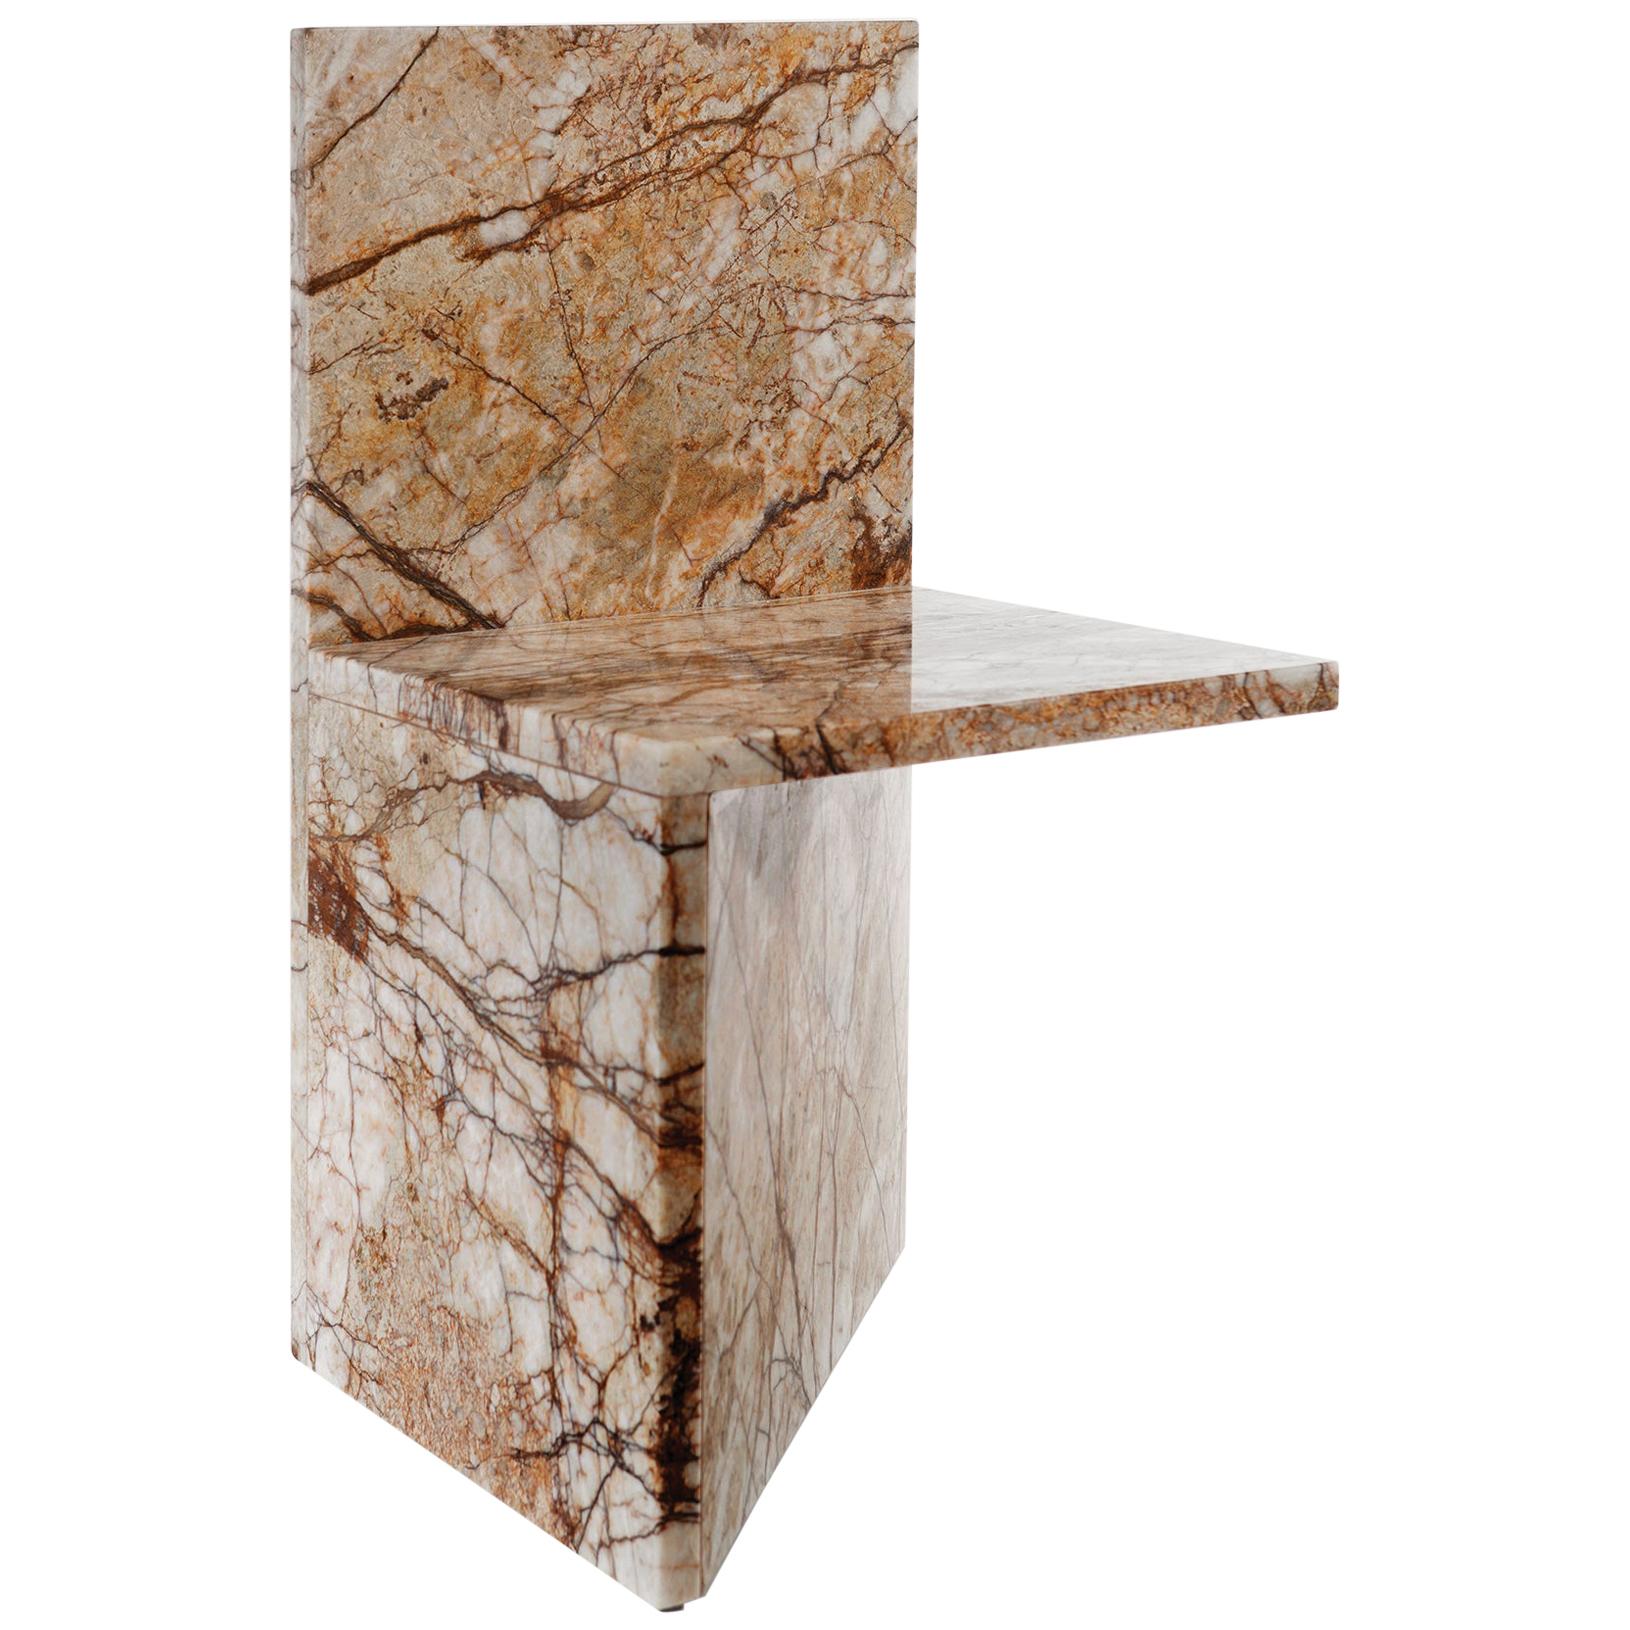 Claste and Here I Sit Hall Chair in Temptation Marble